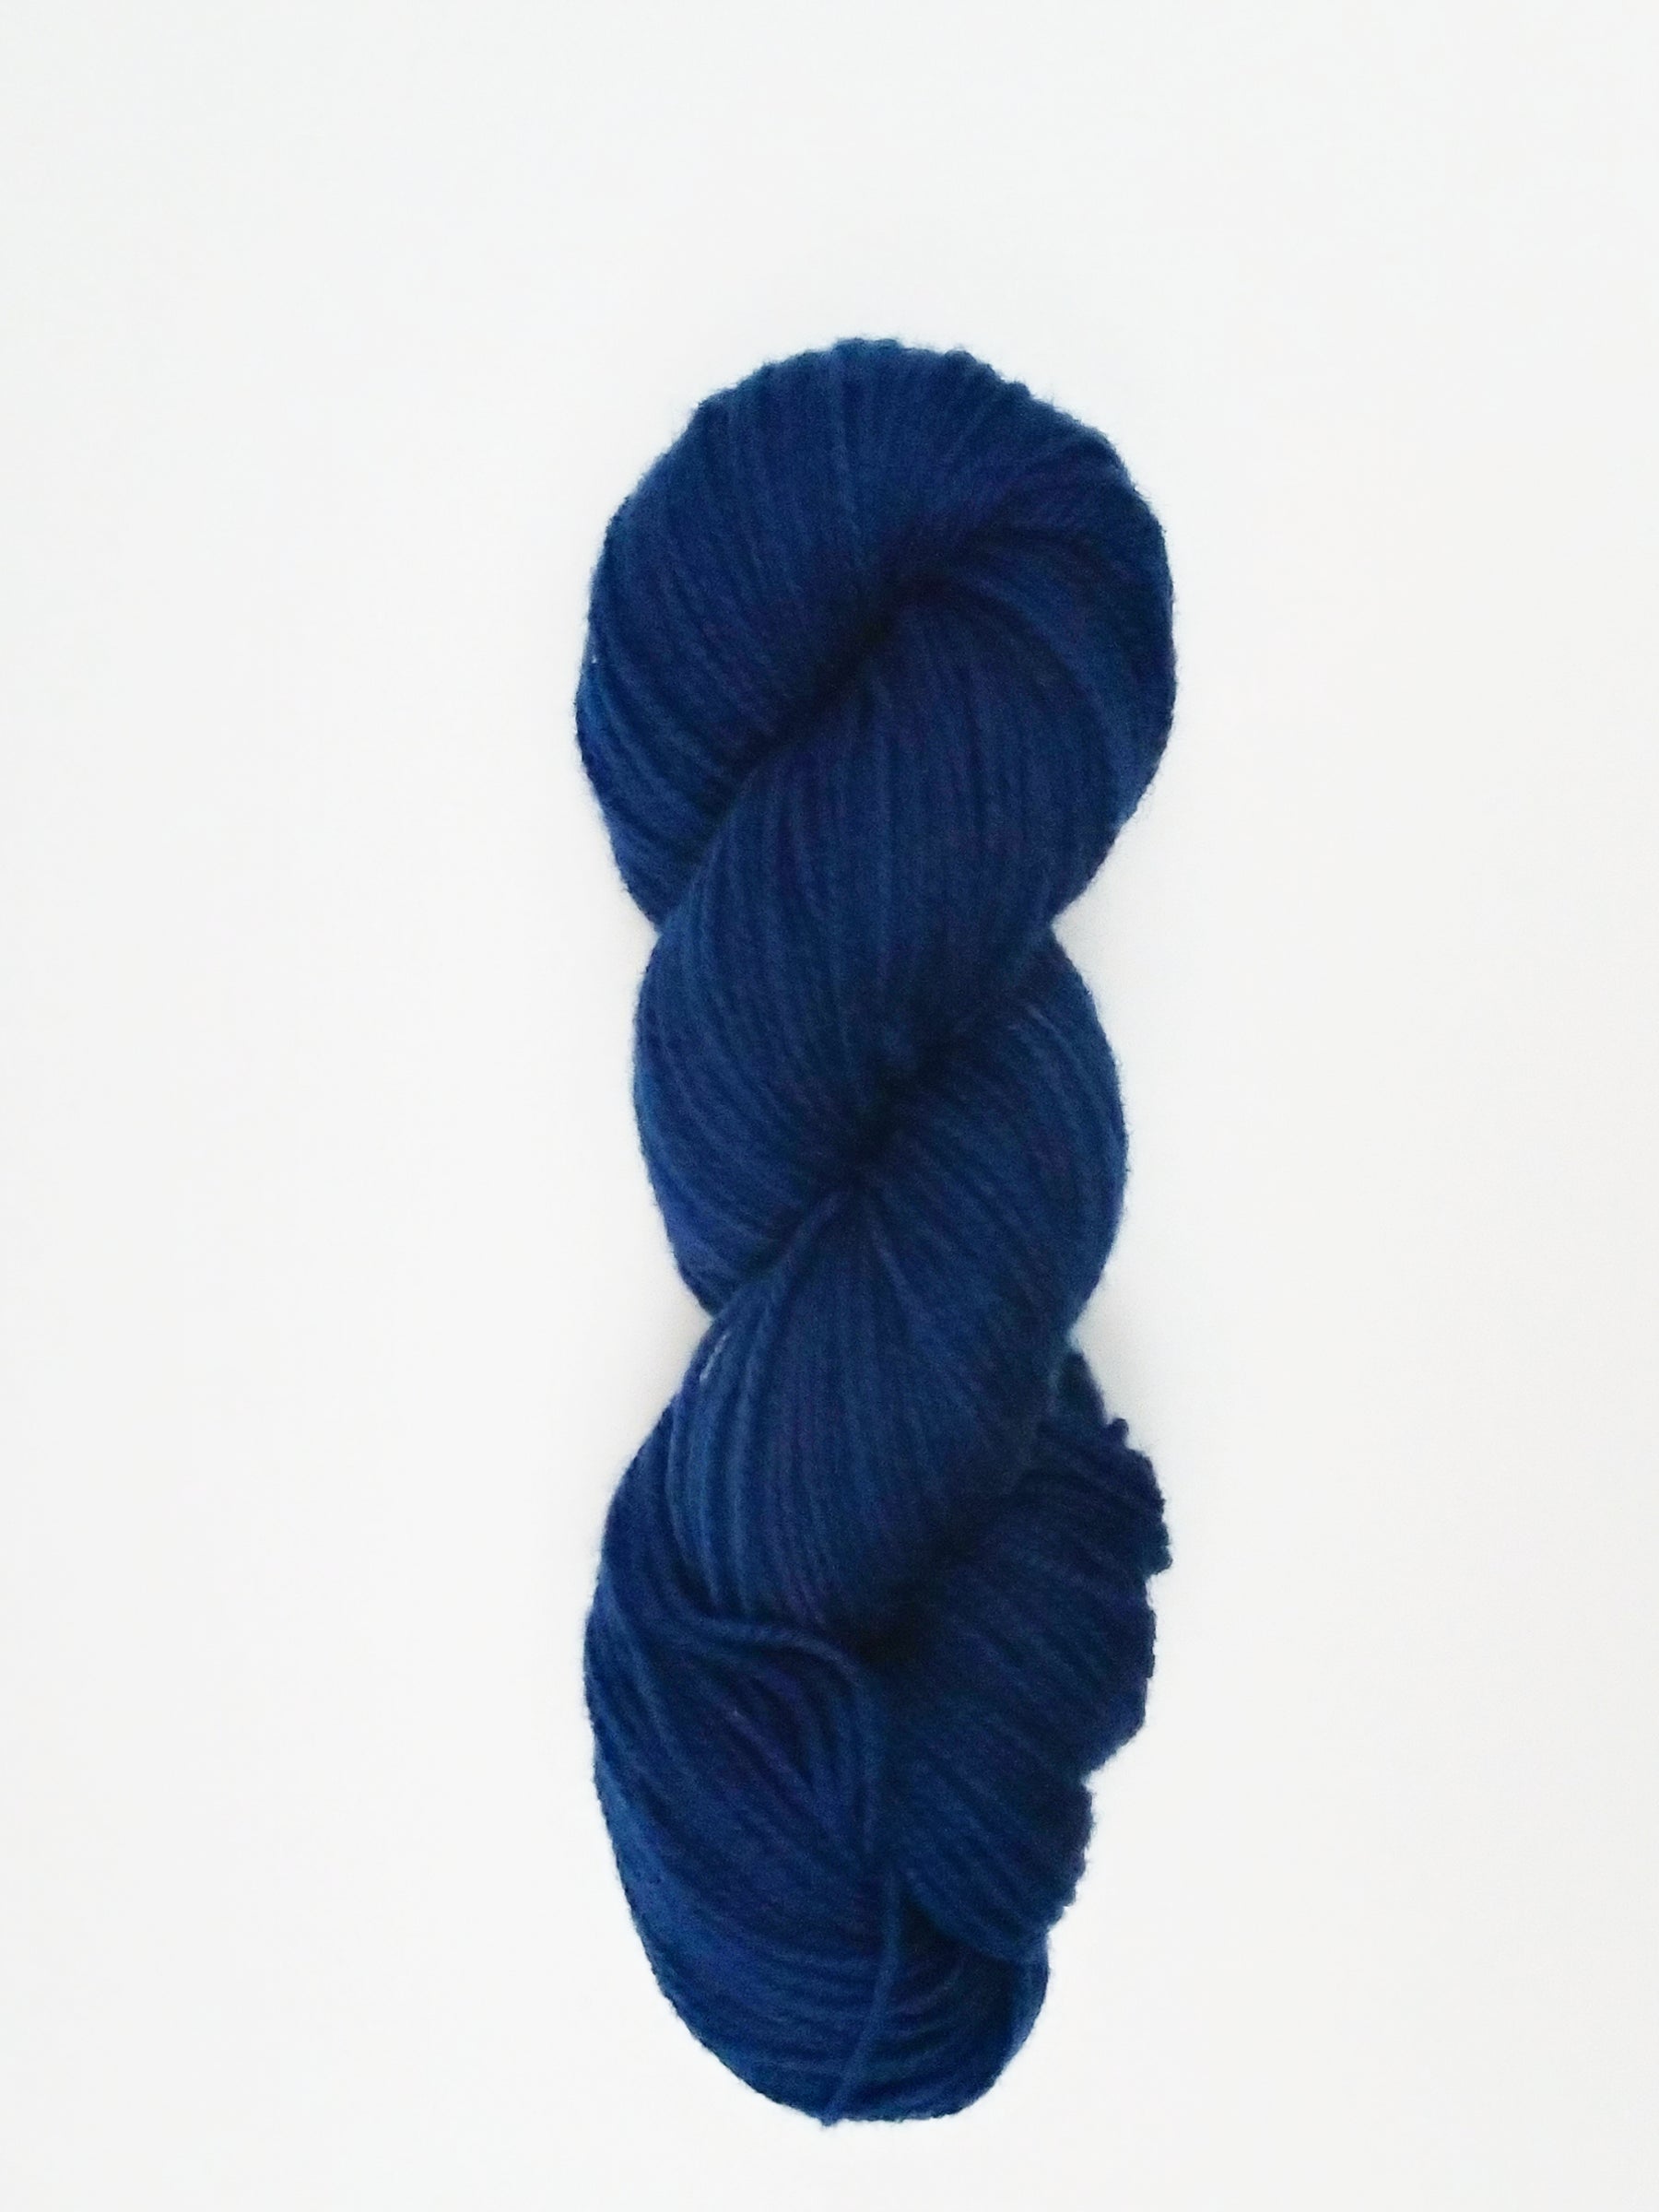 The Knit Apothecary Pure Wool DK Yarn